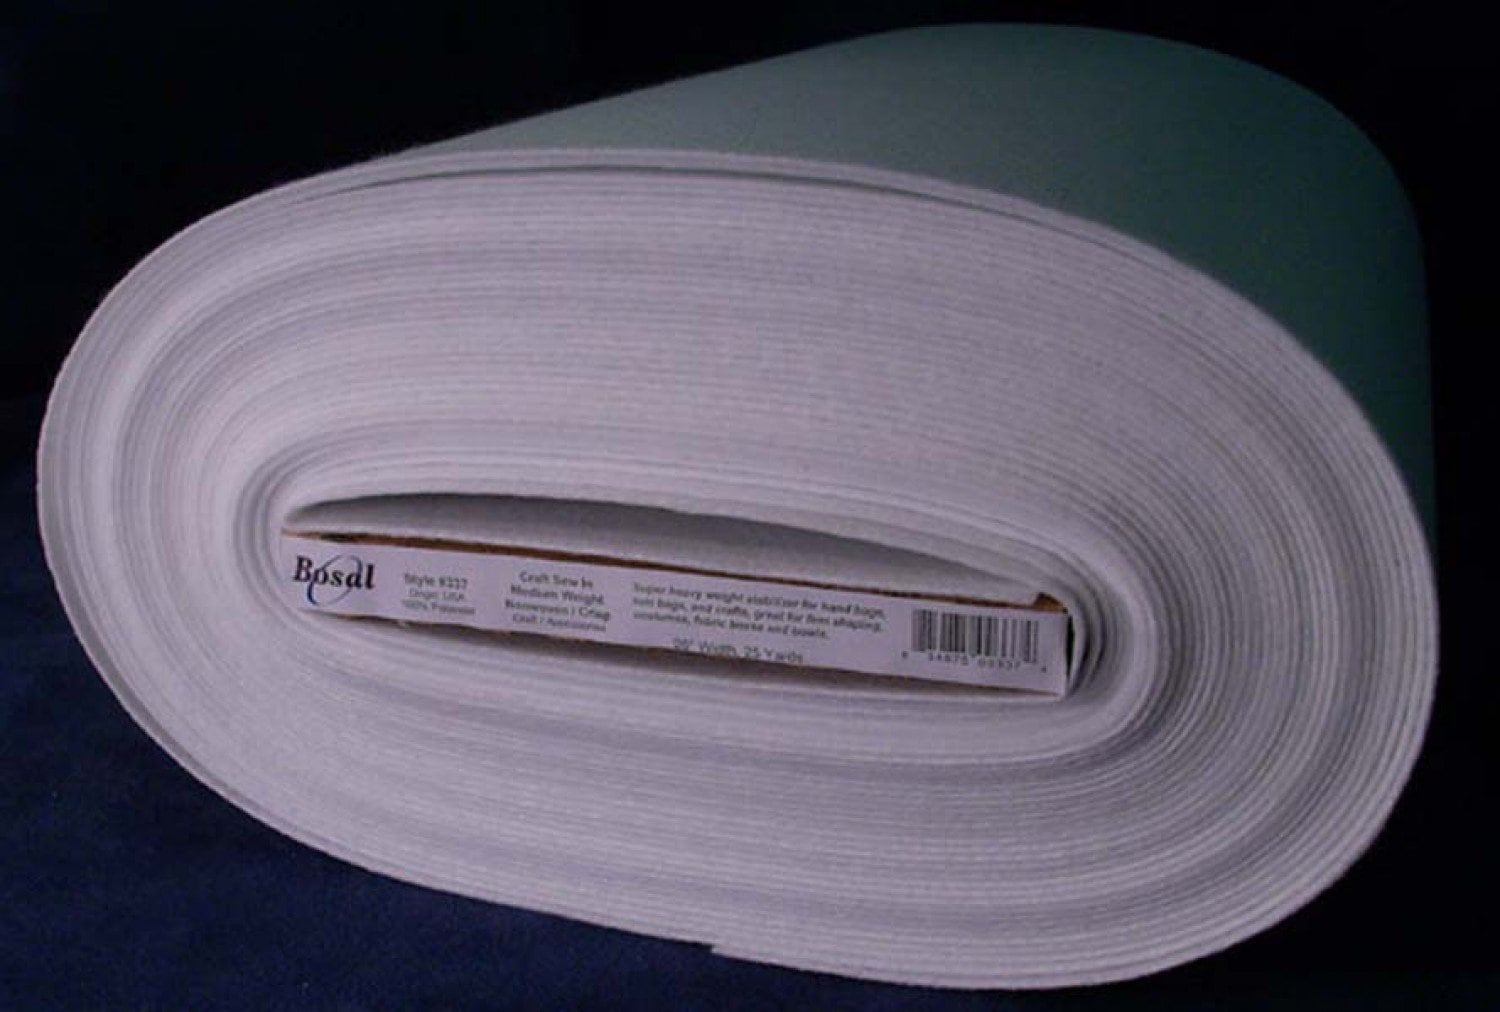 Heatnbond Craft Extra Firm Non-woven Fusible White 20 Inch Wide 